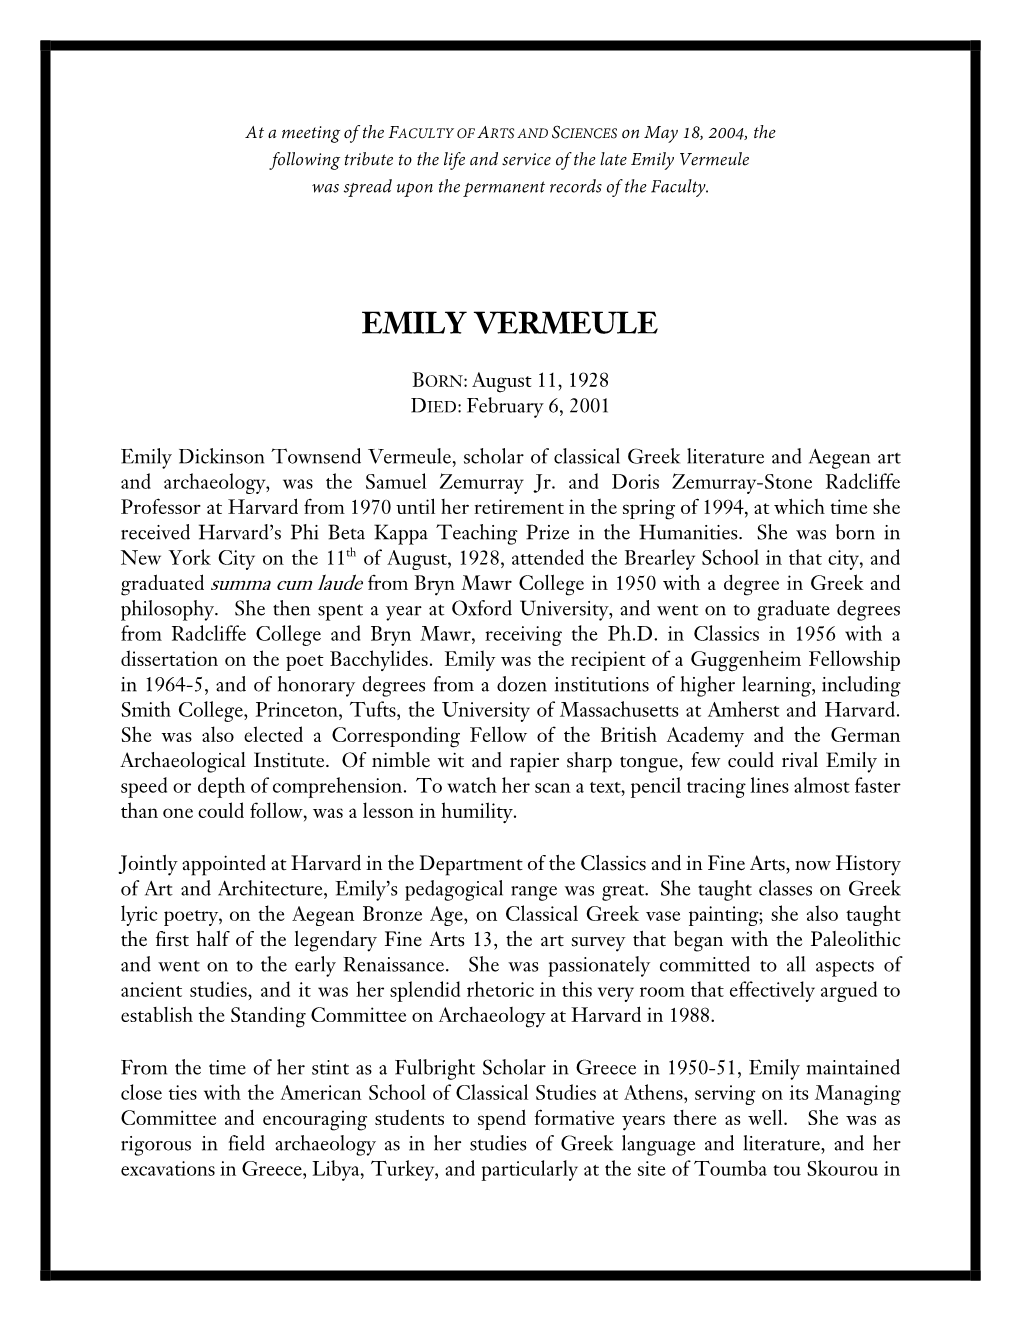 Vermeule Was Spread Upon the Permanent Records of the Faculty